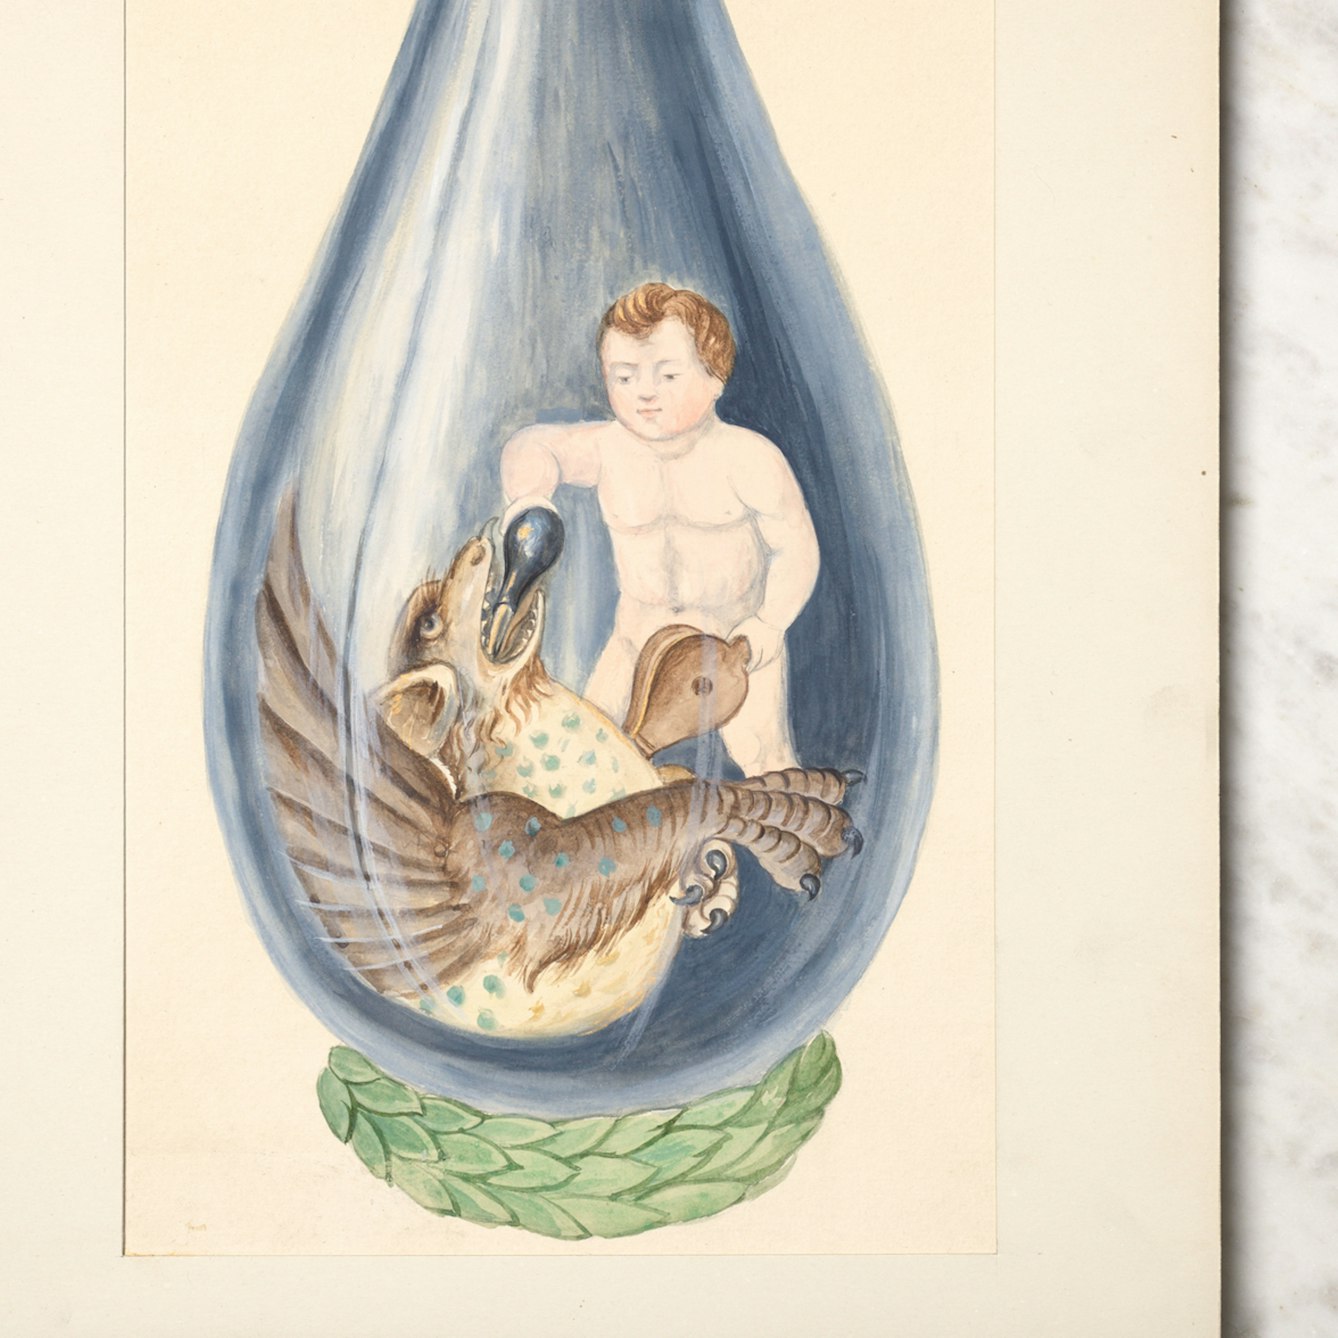 Photograph of a watercolour painting of a putto pouring a phial into a dragon's mouth. The watercolour is resting on a marble circular tabletop with rippled dark blue material on the floor beneath the table.